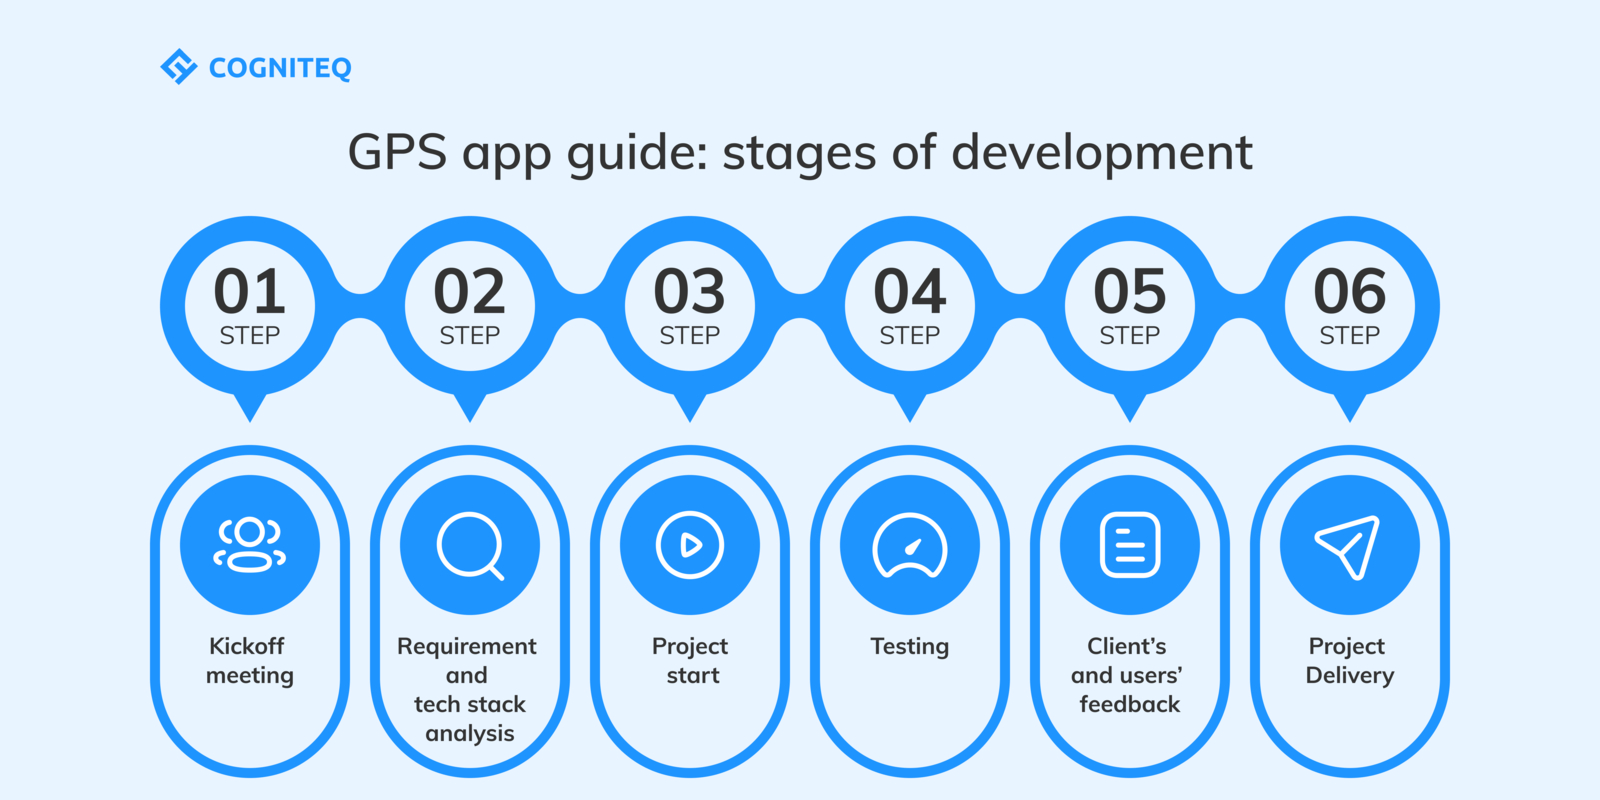 GPS app guide: stages of development